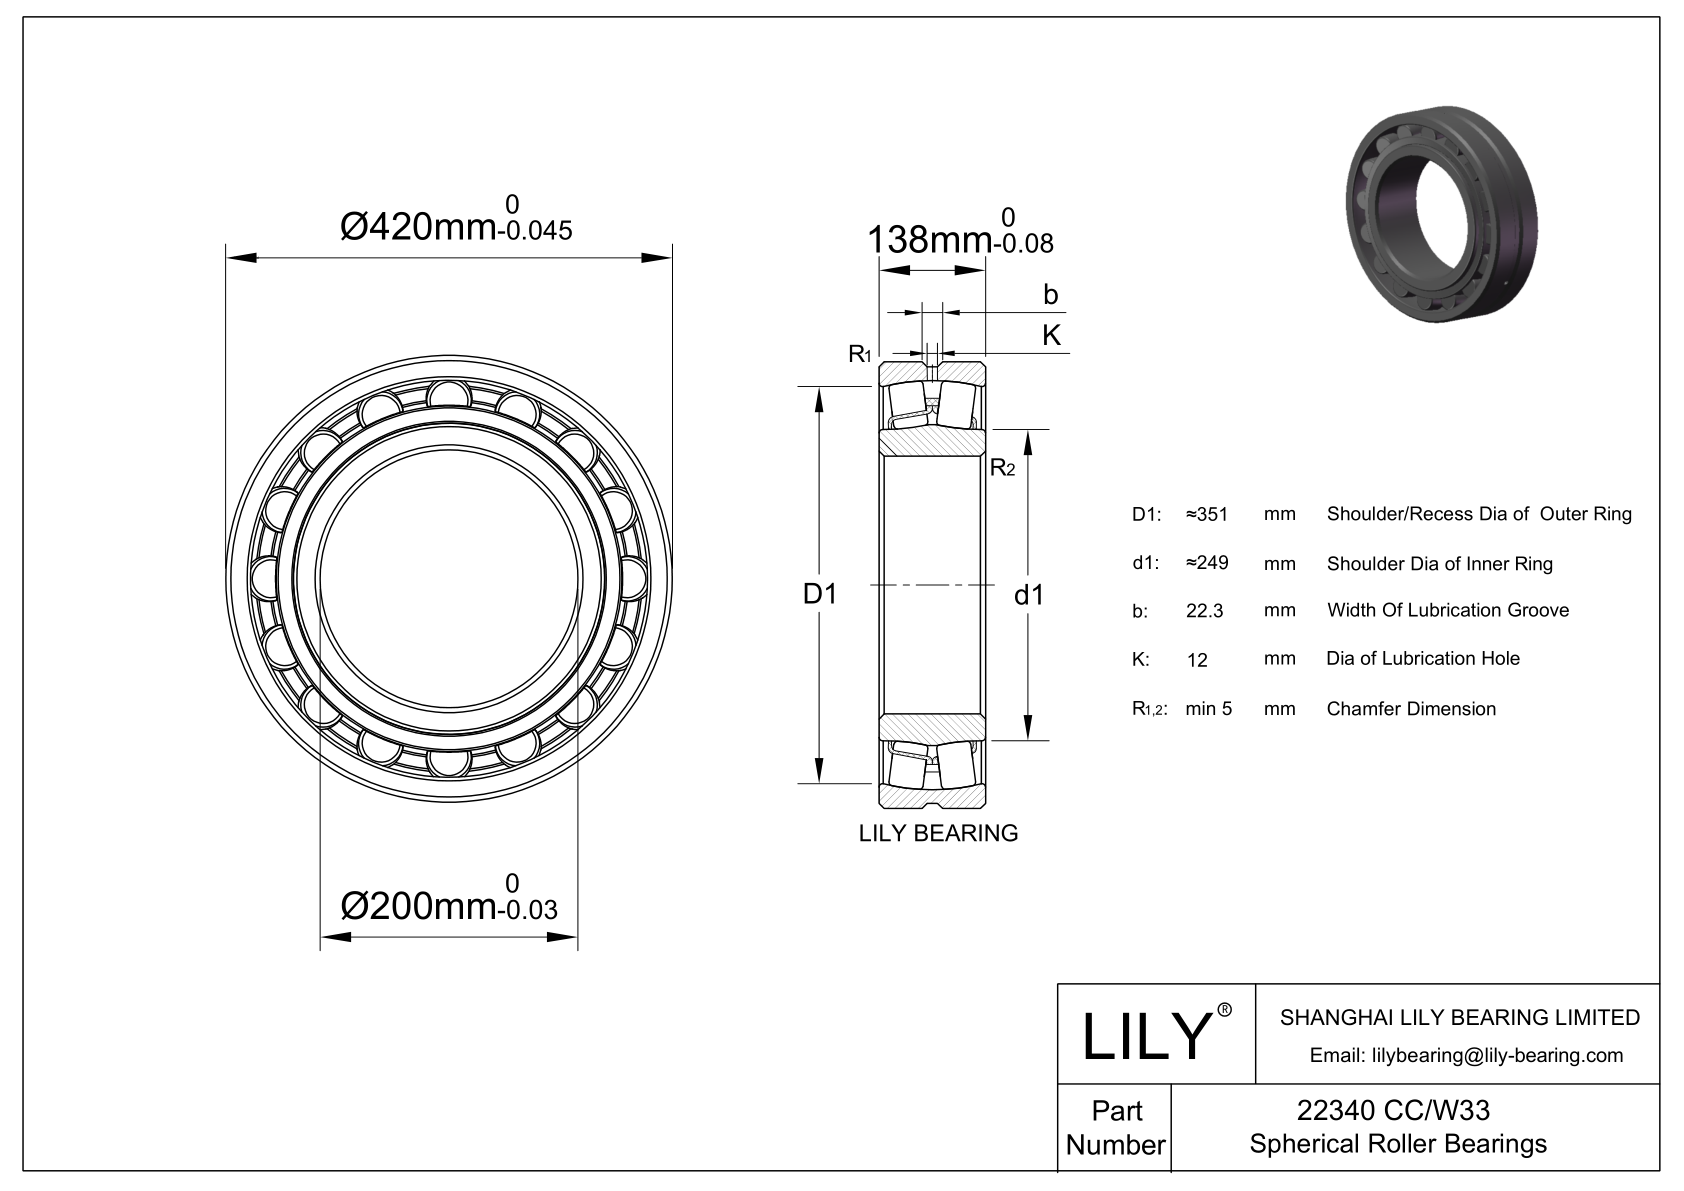 22340 CC/W33 Double Row Spherical Roller Bearing cad drawing